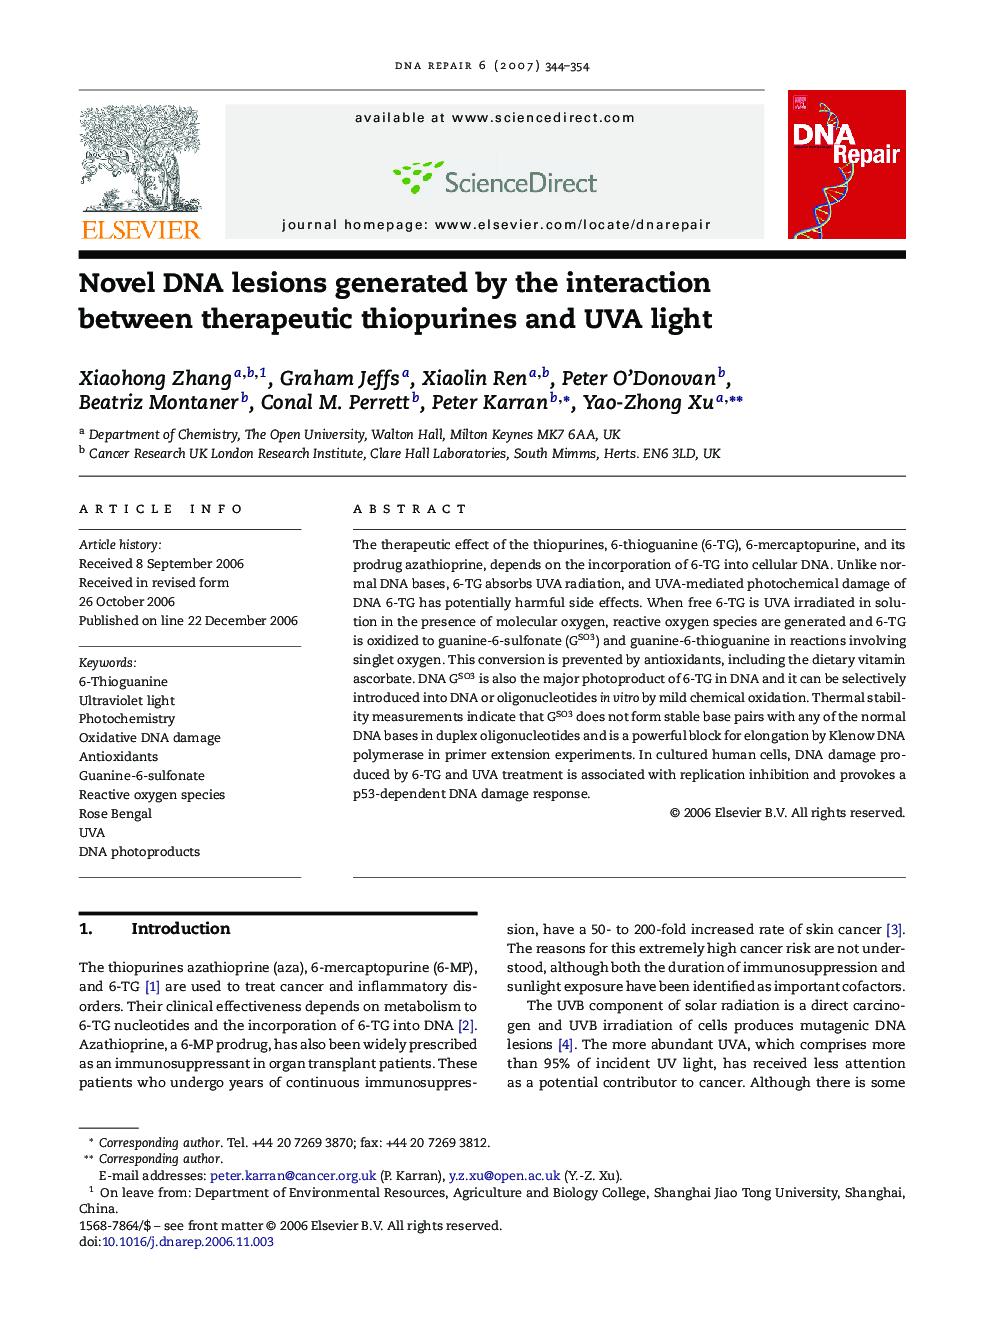 Novel DNA lesions generated by the interaction between therapeutic thiopurines and UVA light